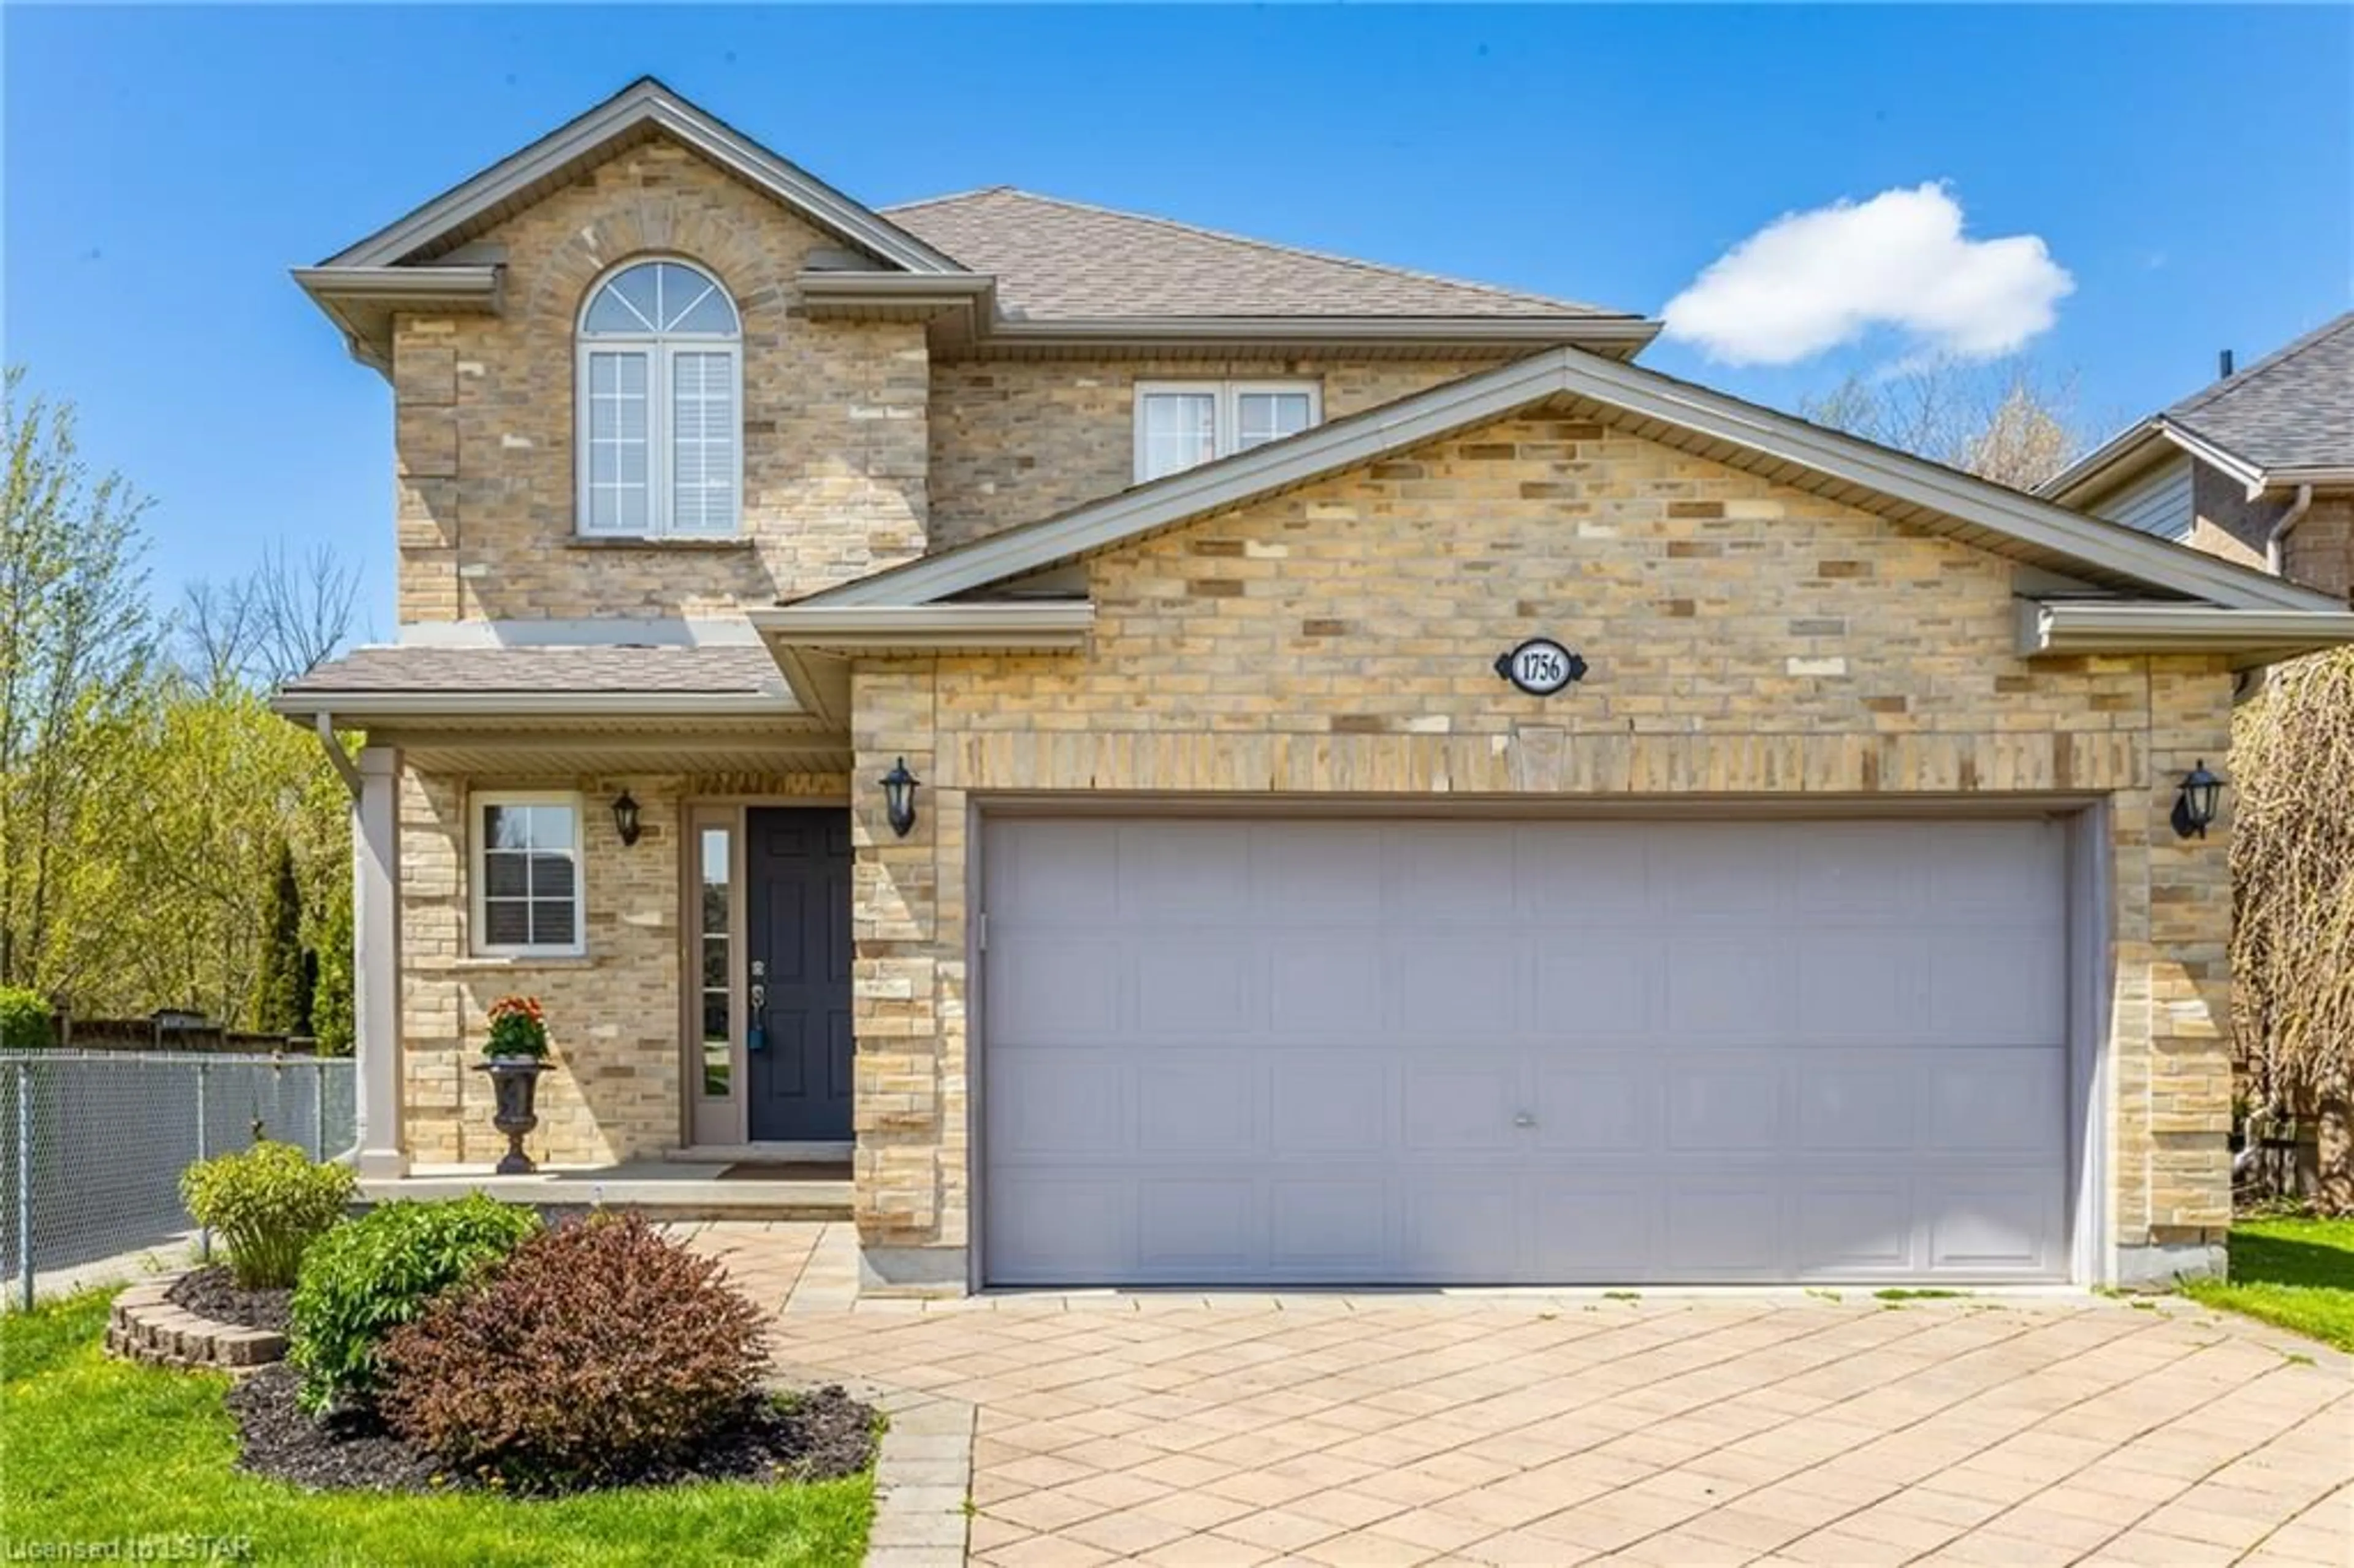 Home with brick exterior material for 1756 Birchwood Dr, London Ontario N6K 4X2